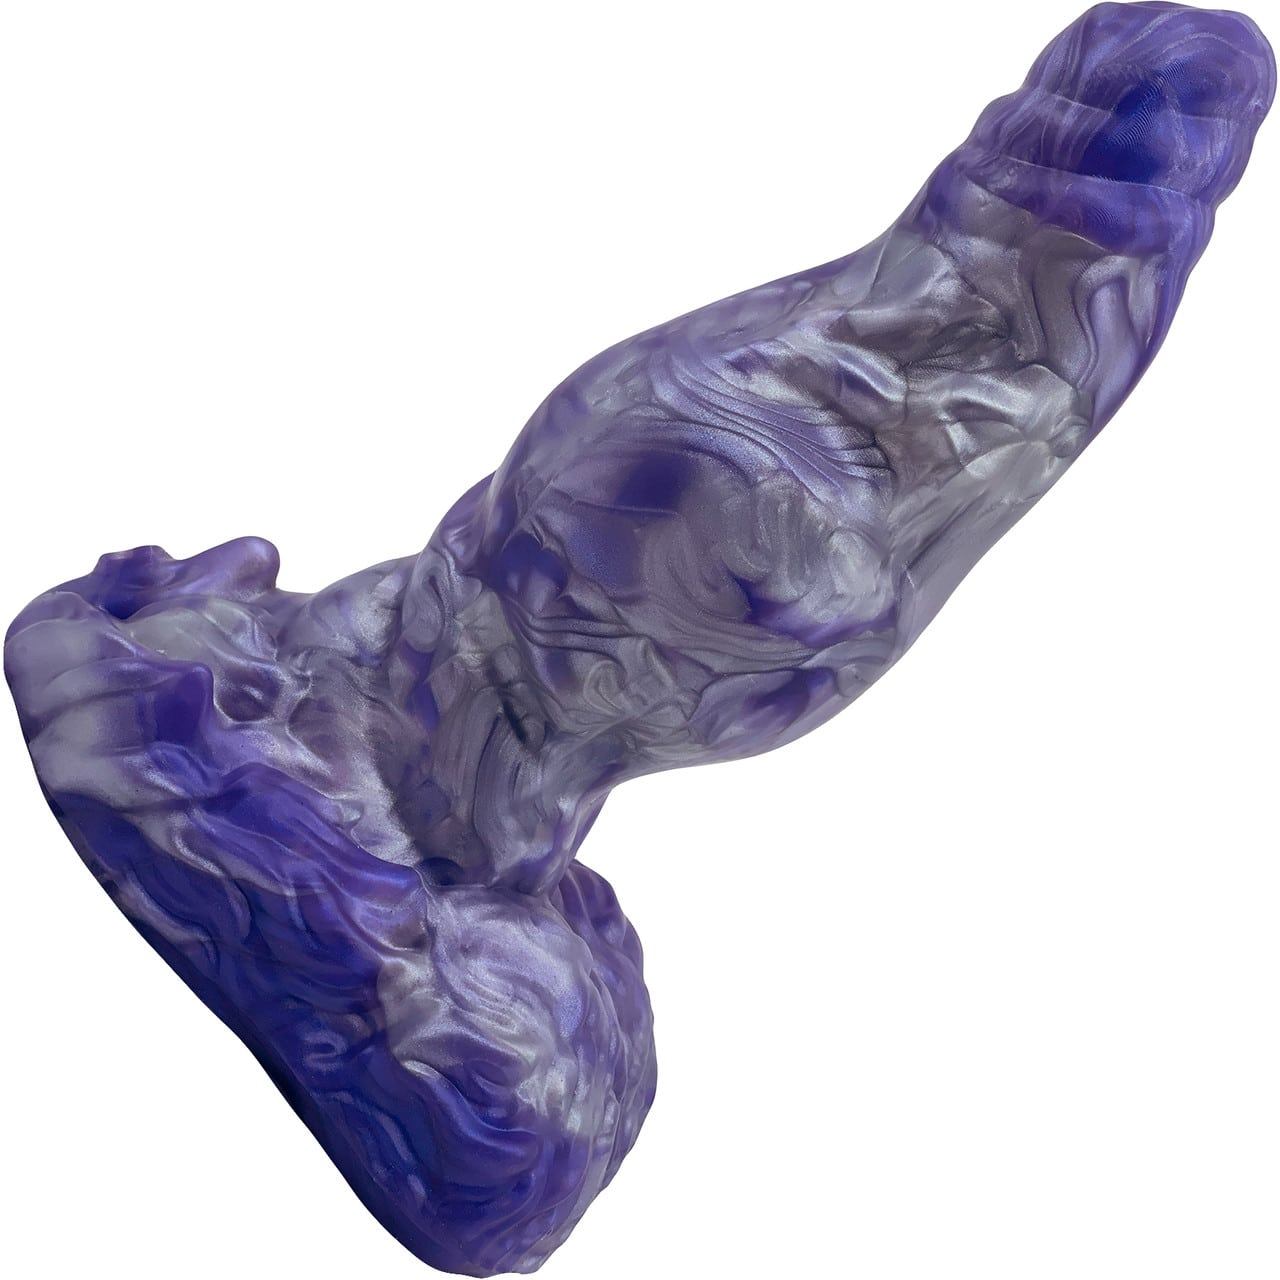 Uncover Creations The Werewolf Dog Dildo. Slide 2